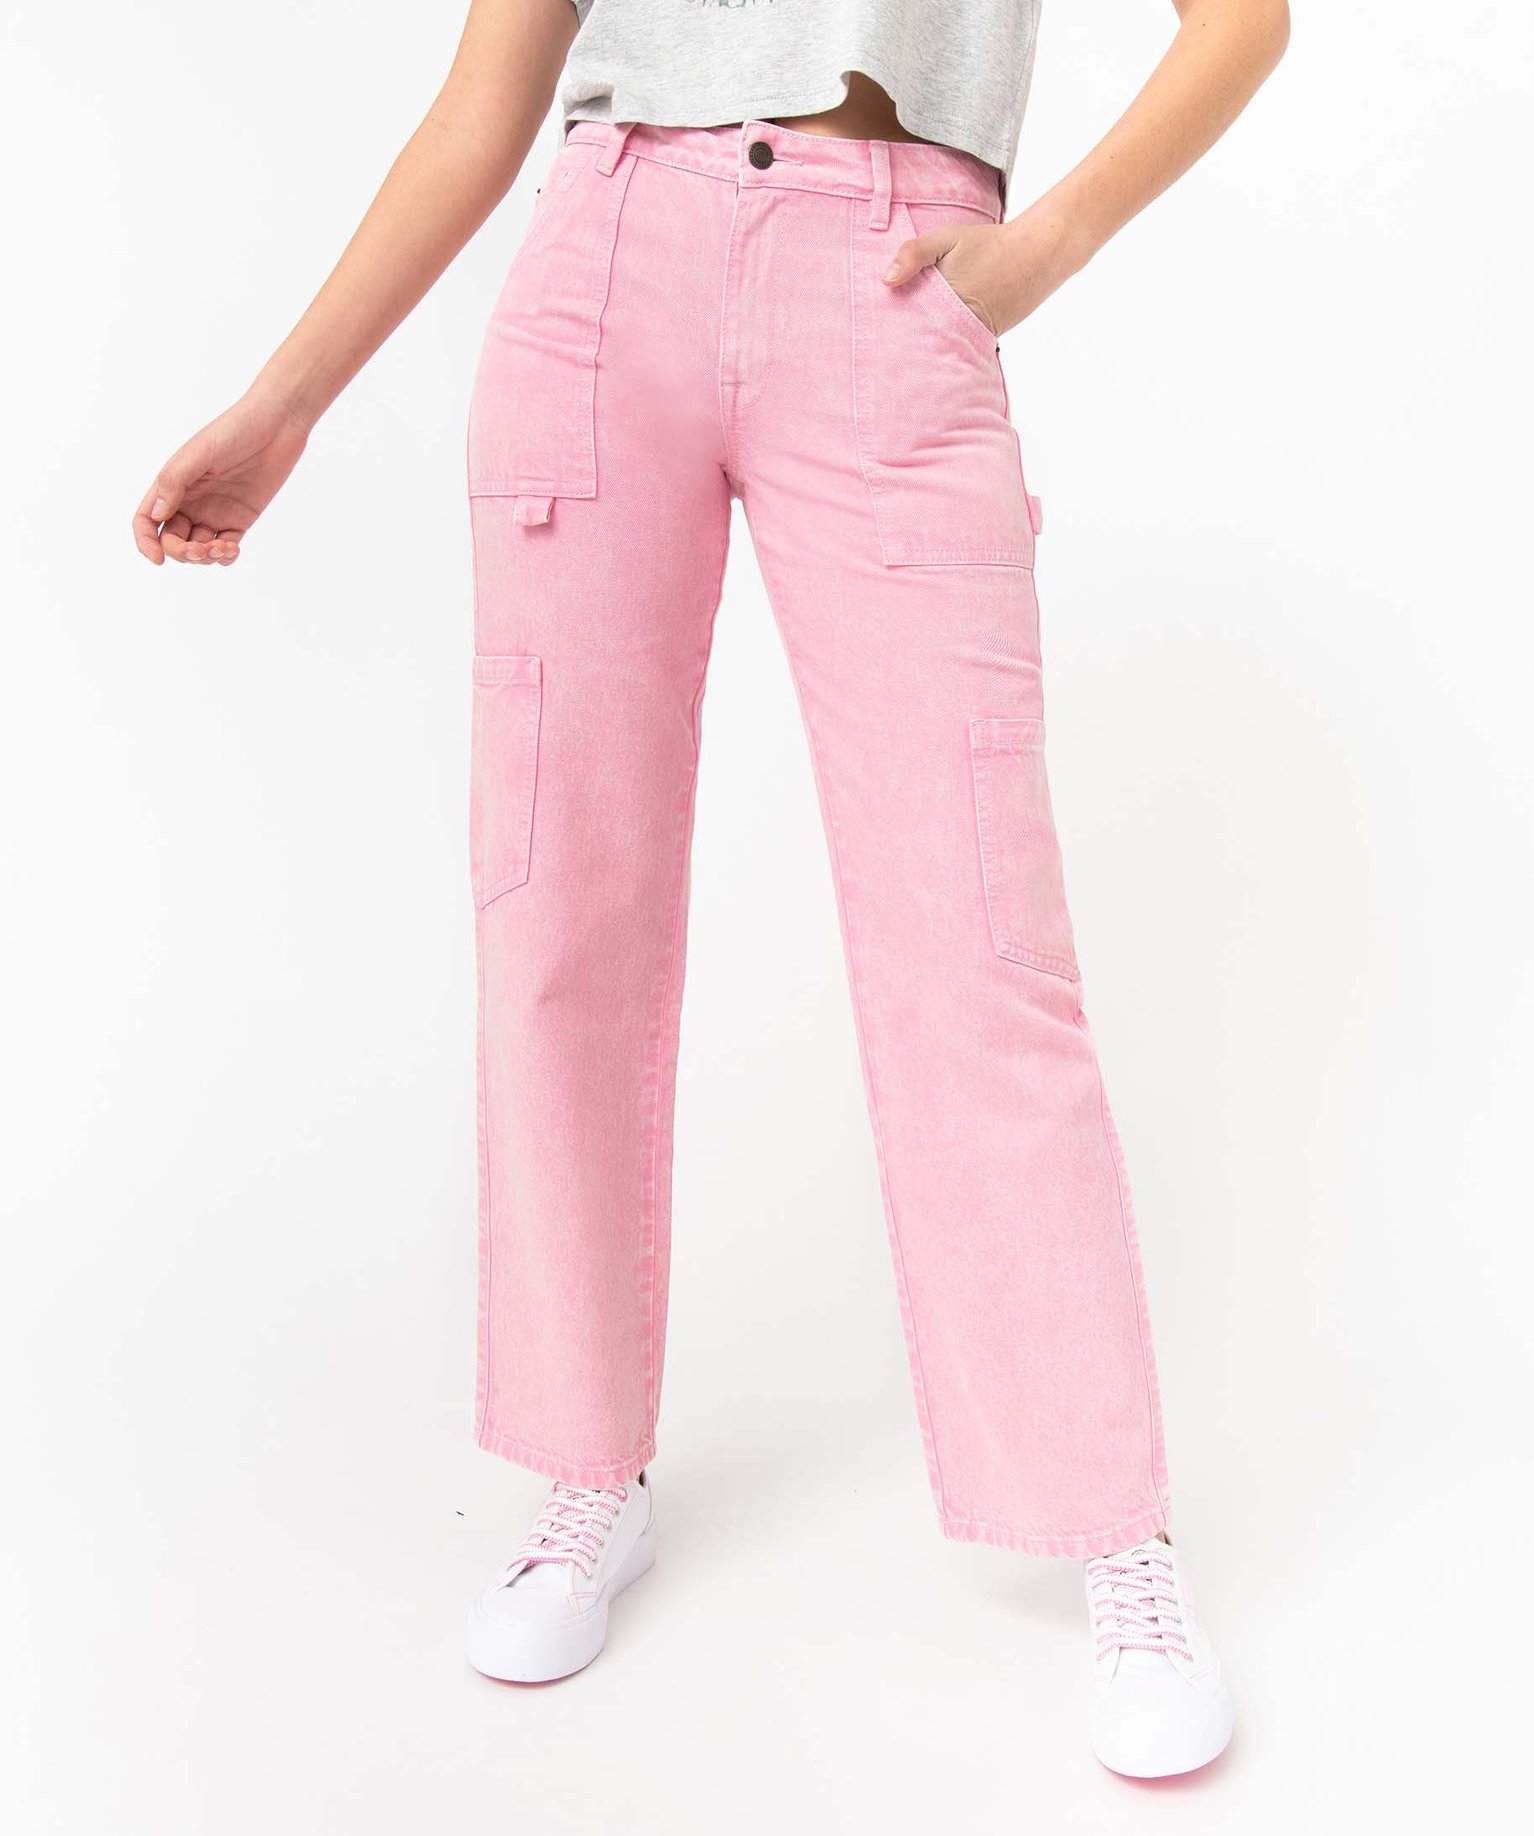 jean femme coupe large - camps united rose pantalons